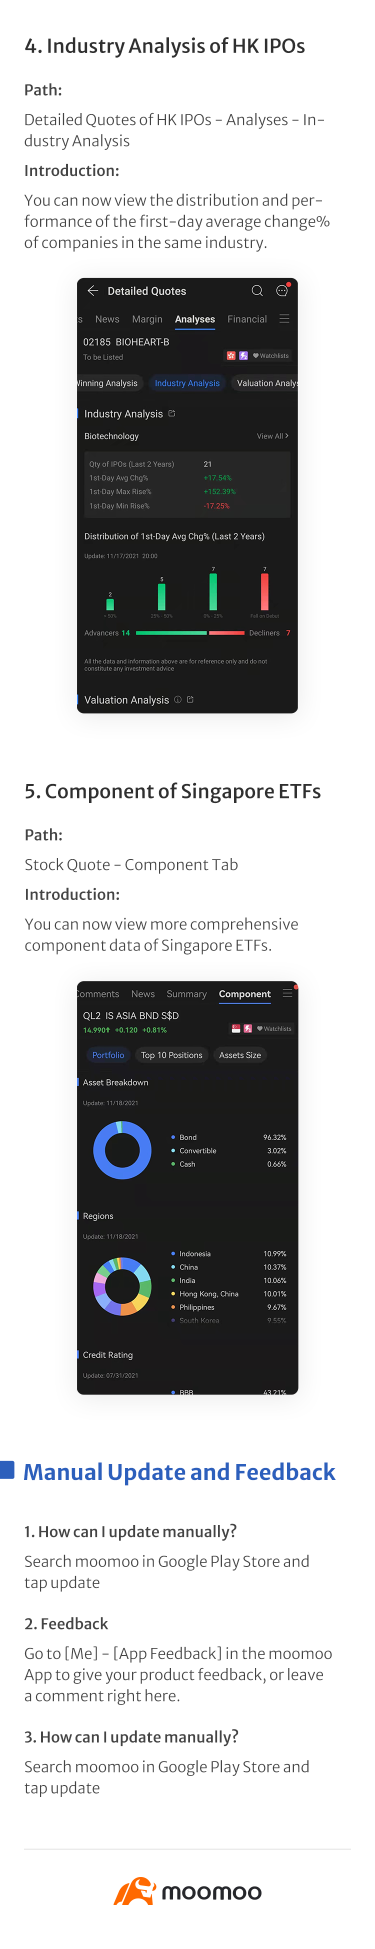 What's New: OTC Stock Screener And Top Holders of A-Shares Viewable in Android v11.27